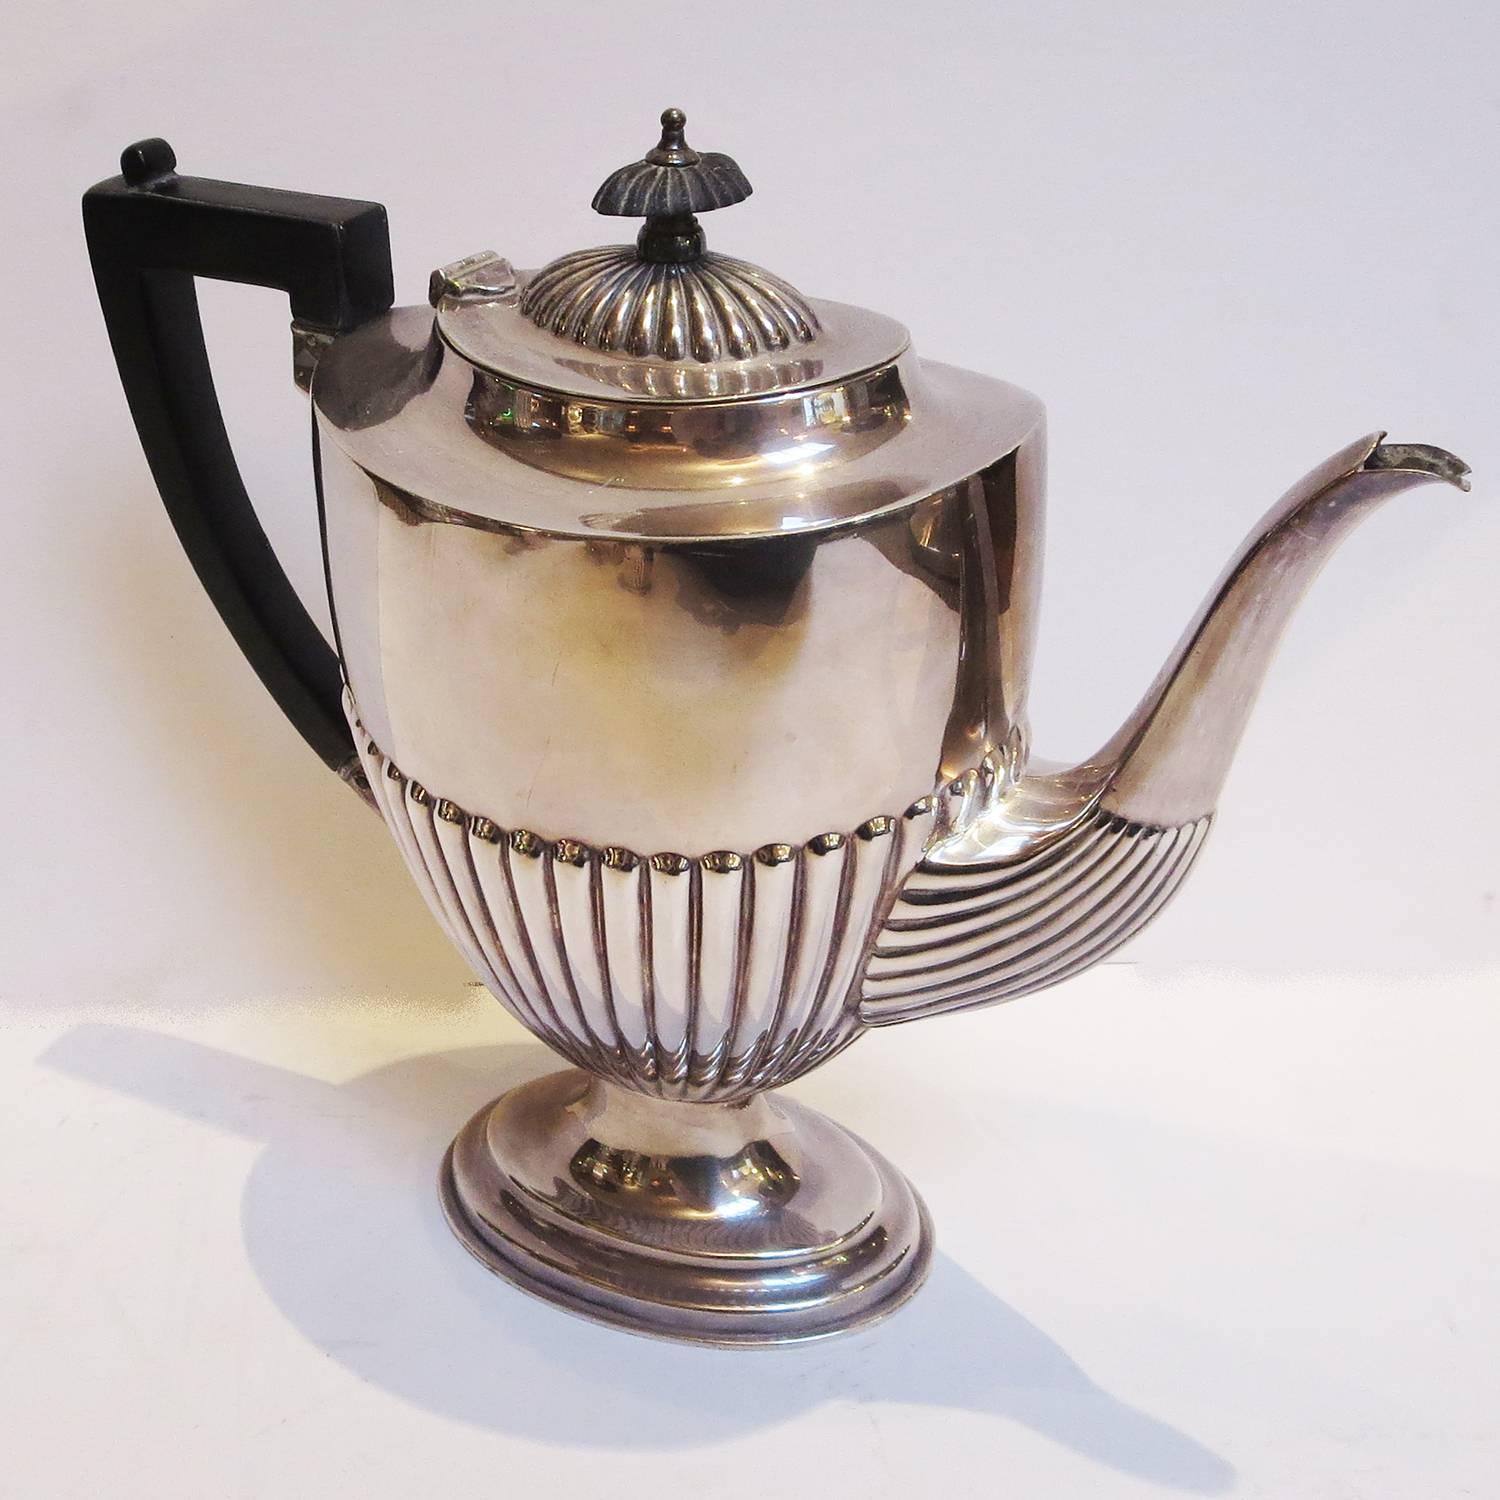 What could be more gracious than to serve your guests and friends from this stylish set? The grouping consists of a tall coffee server, a rounded tea server, a large sugar bowl, and generous creamer. All are in very fine condition, without ant